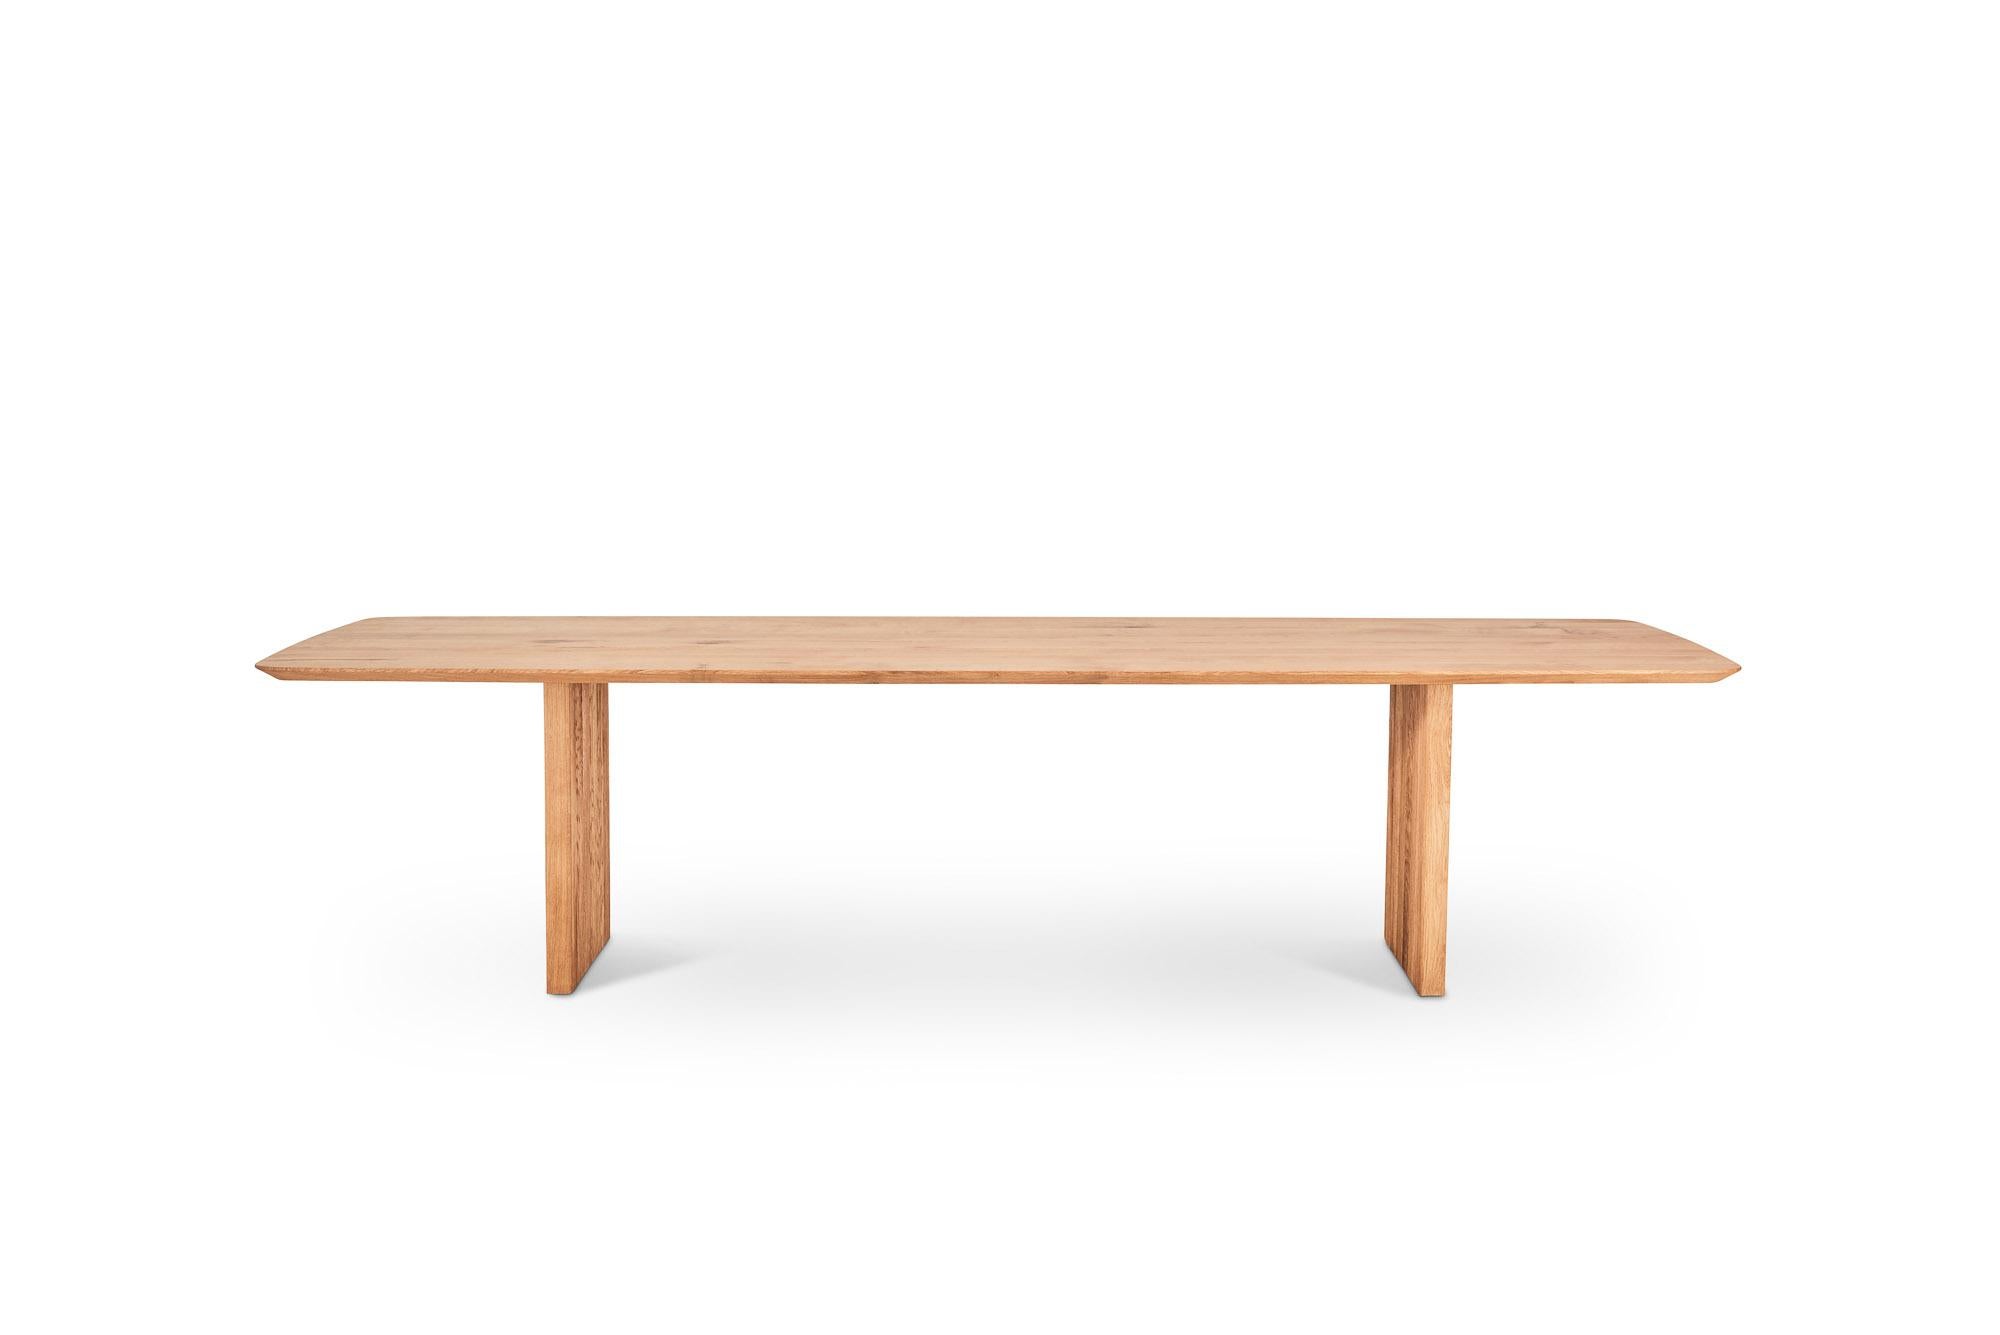 TEN dining table, rectangular, 300cm
Solid wood tabletop and legs. Handmade in Denmark.

Height: 72 or 74 cm

Tabletop dimensions:
– 200 x 95 cm
– 240 x 105 cm
– 270 x 105 cm
– 300 x 105 cm
– 340 x 105 cm
– 370 x 105 cm
– 400 x 105